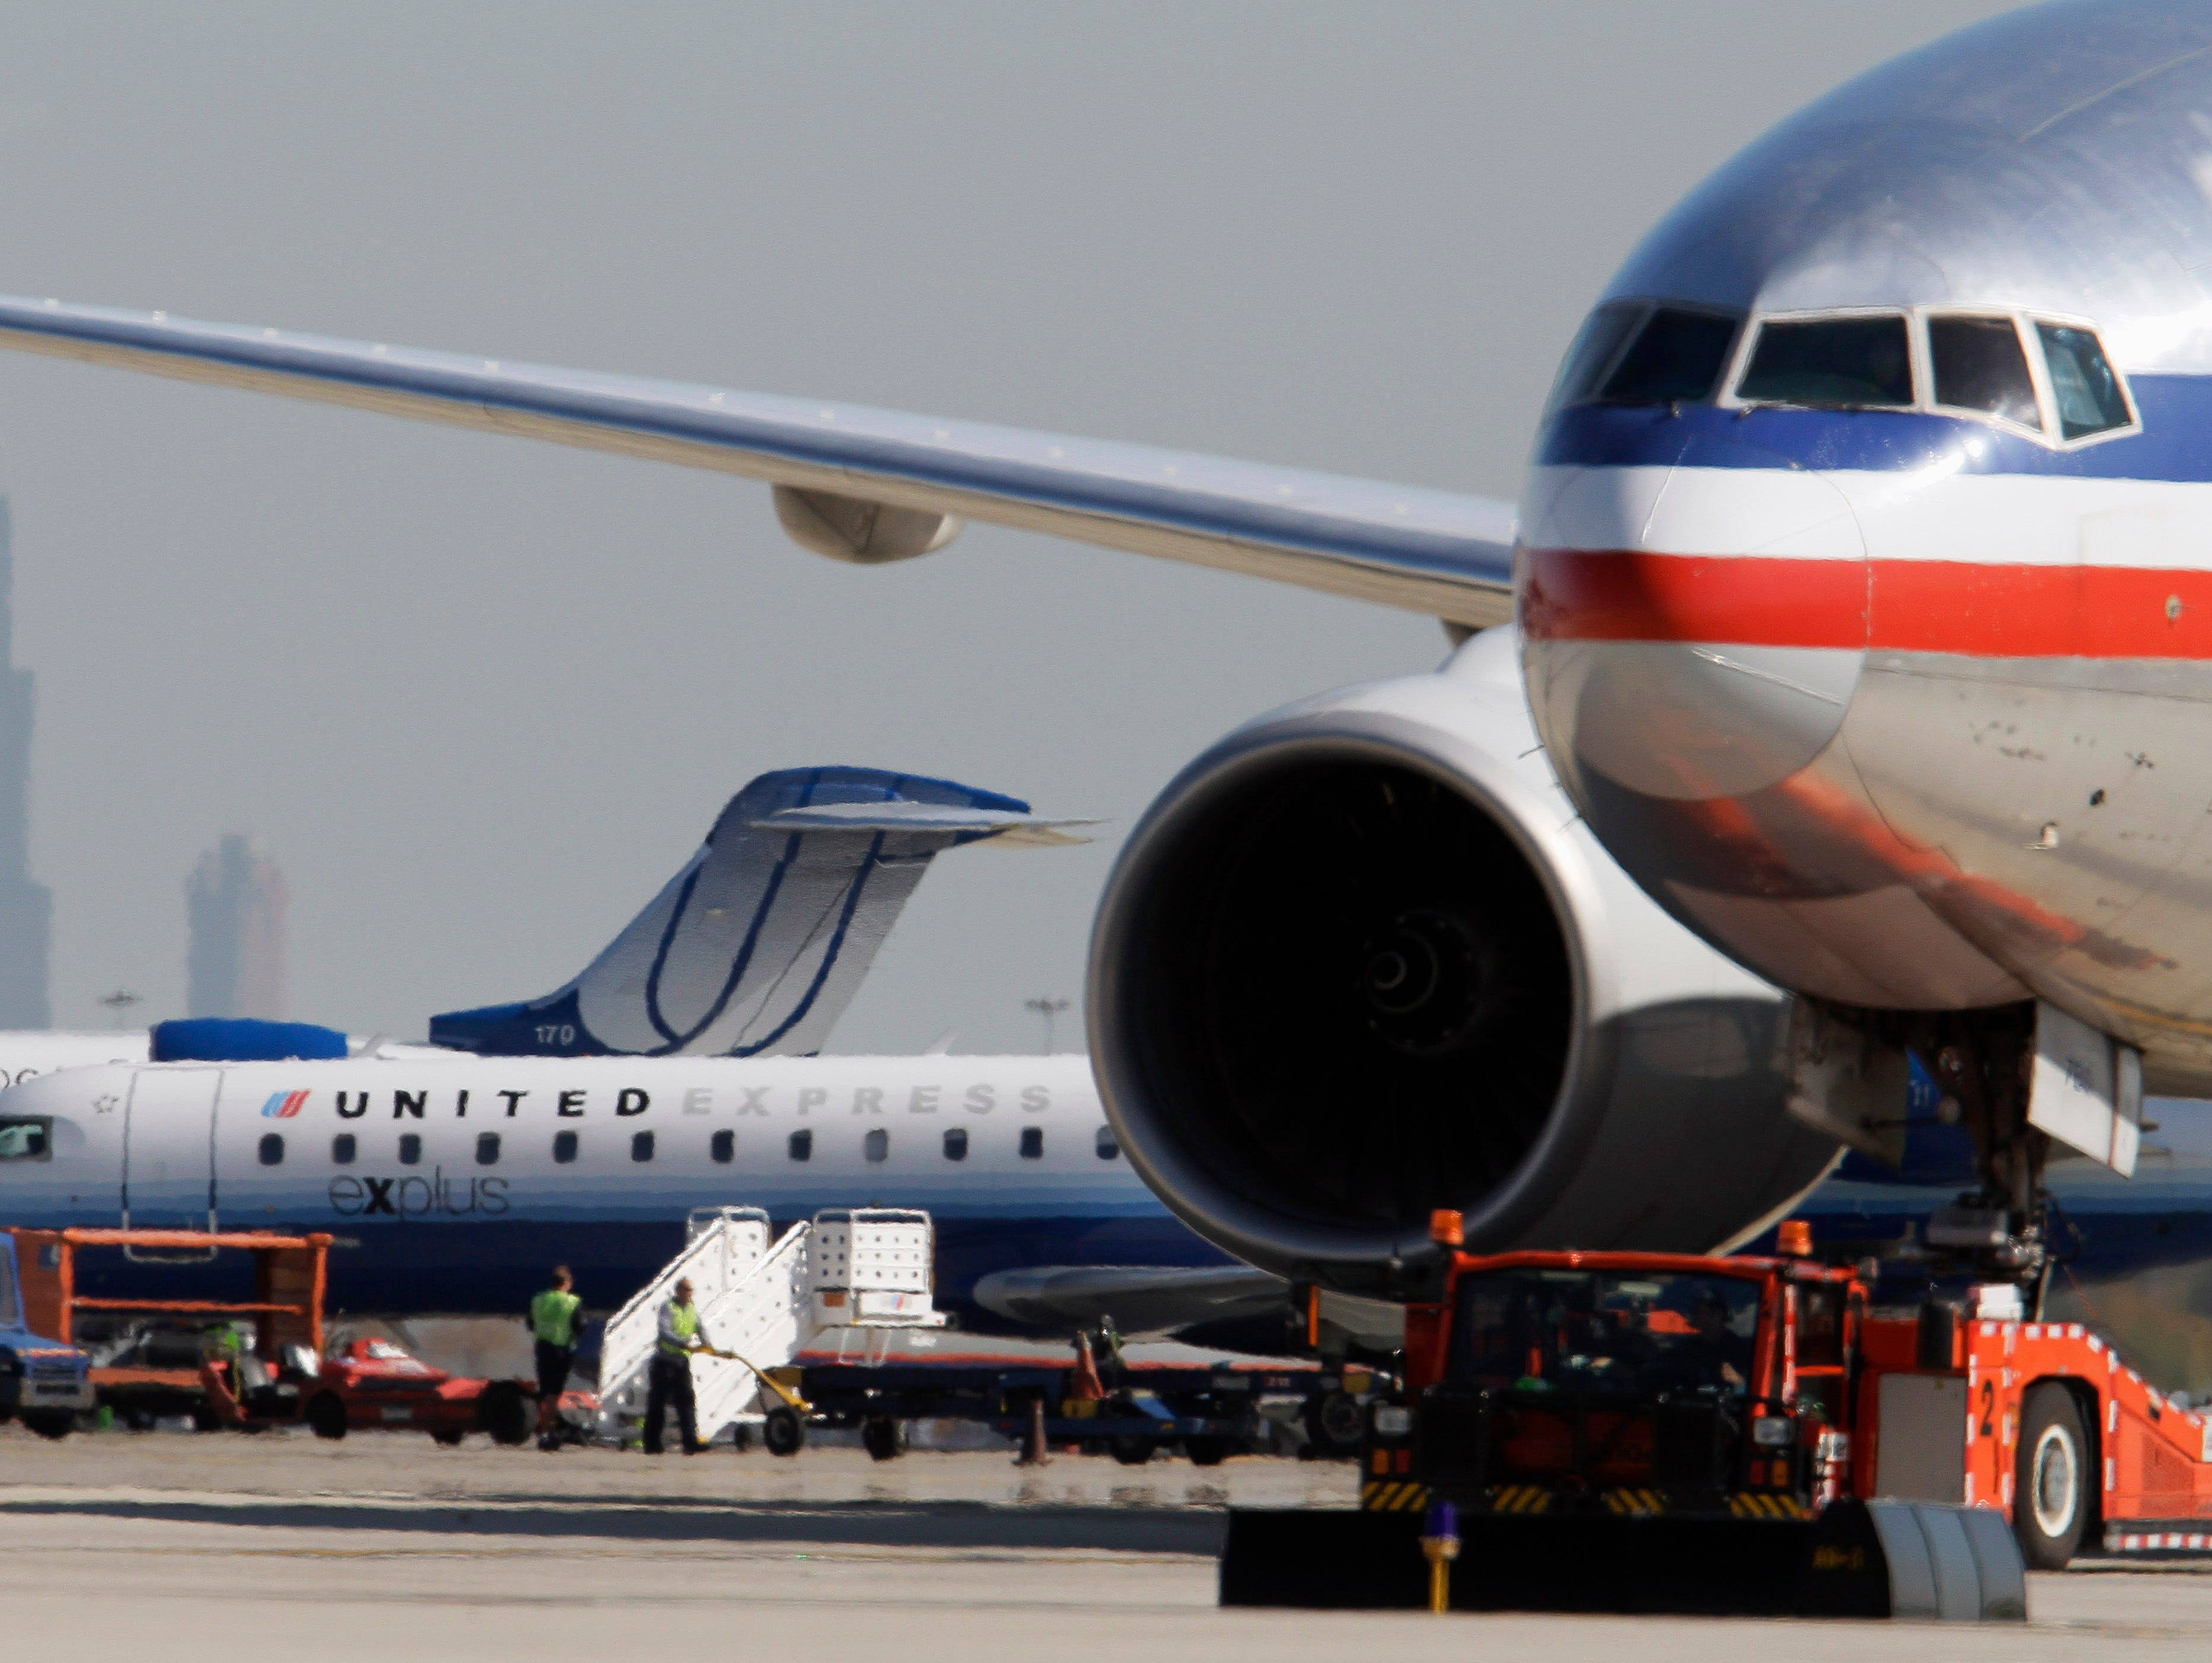 In this photo from Oct. 5, 2010, an American Airlines jet, right, taxis past United Airlines and United Express jets at O'Hare International Airport in Chicago.